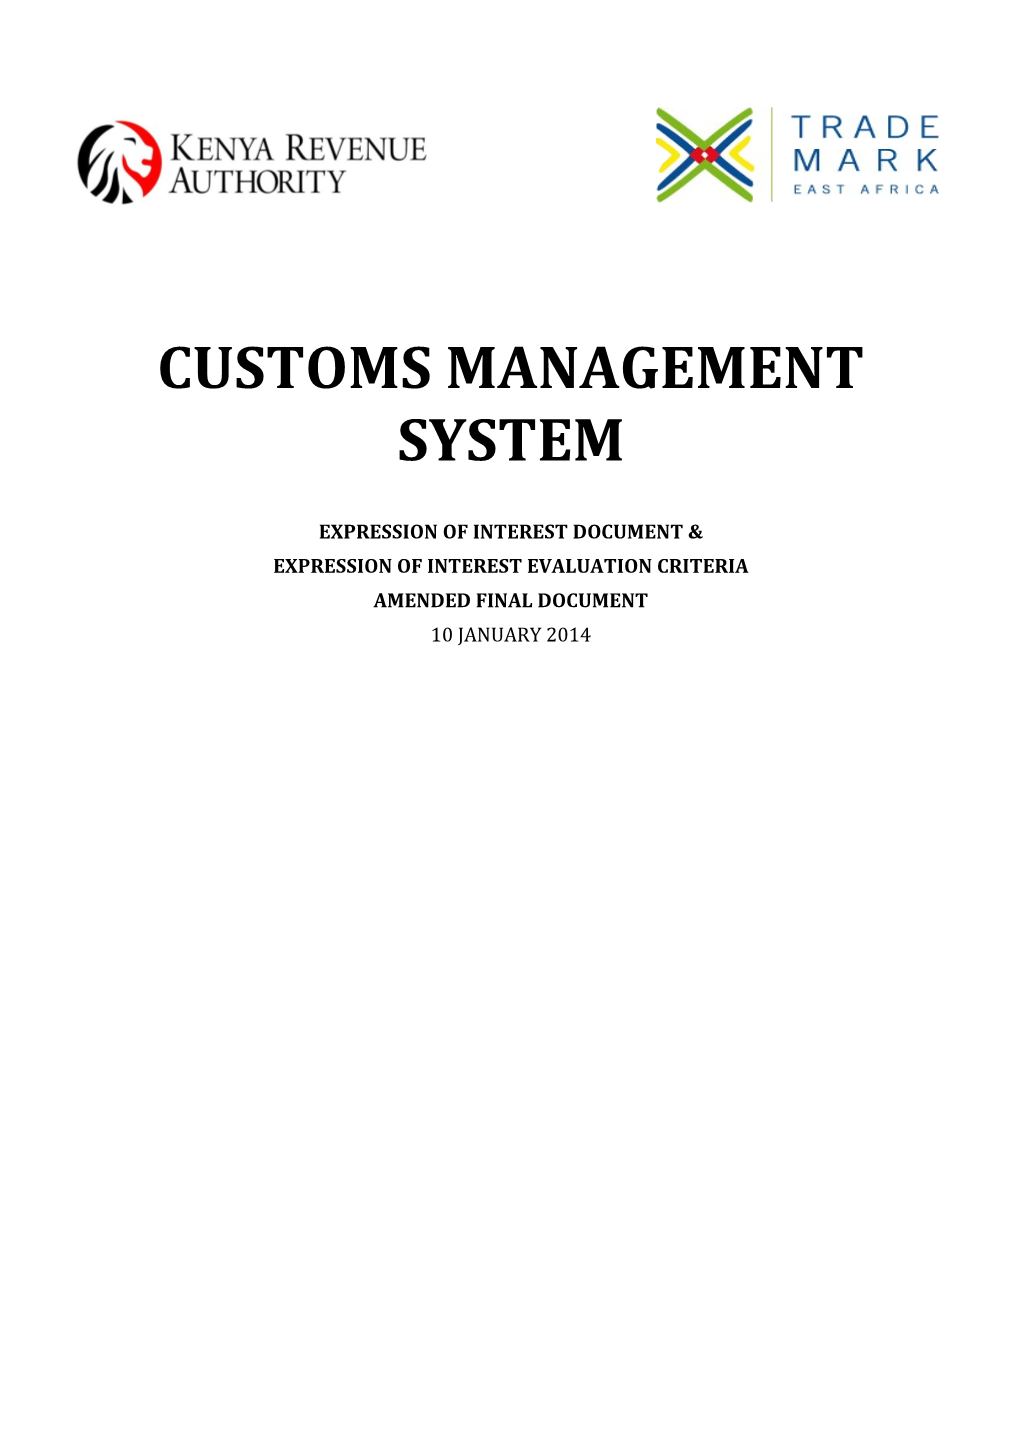 Eoi Integrated Customs Management System and Related Modernisation Services